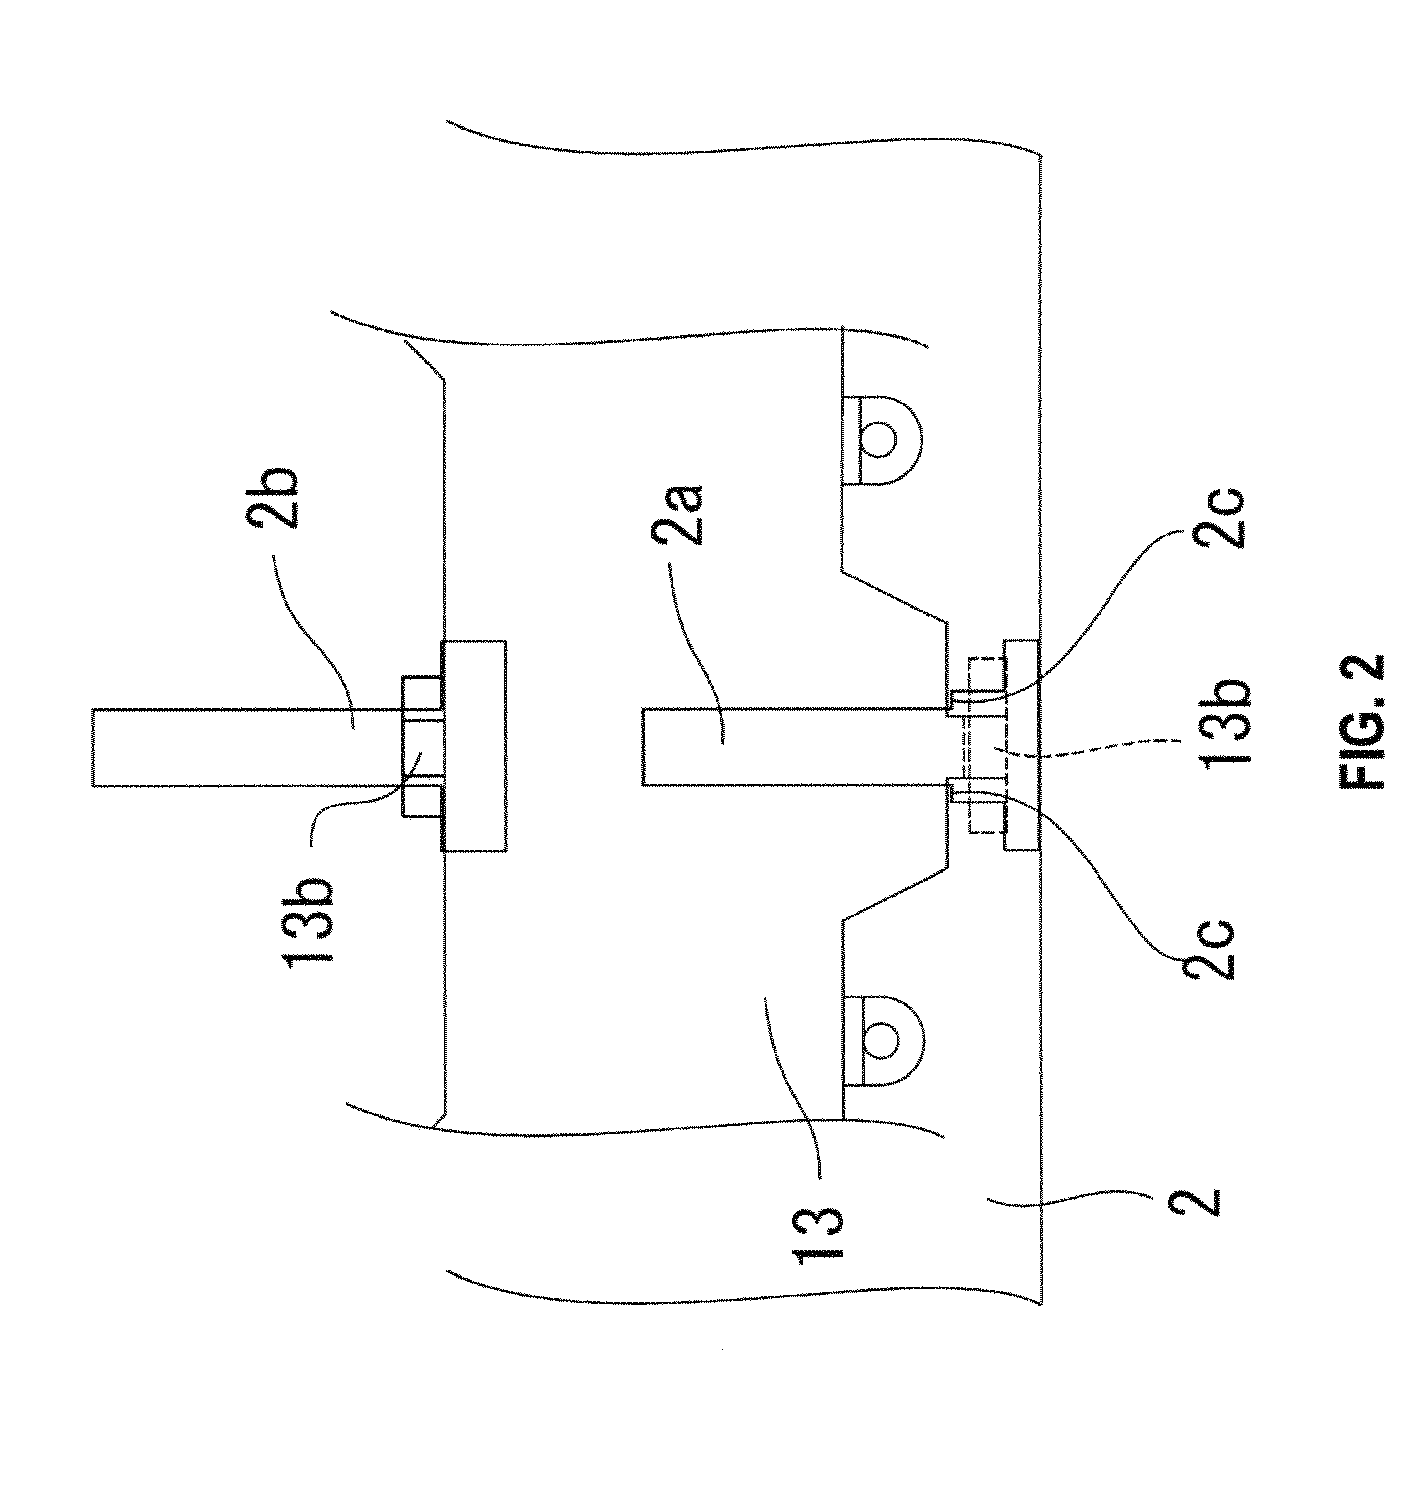 Optical Disk Player Capable of Monitoring the Optical Disk Status